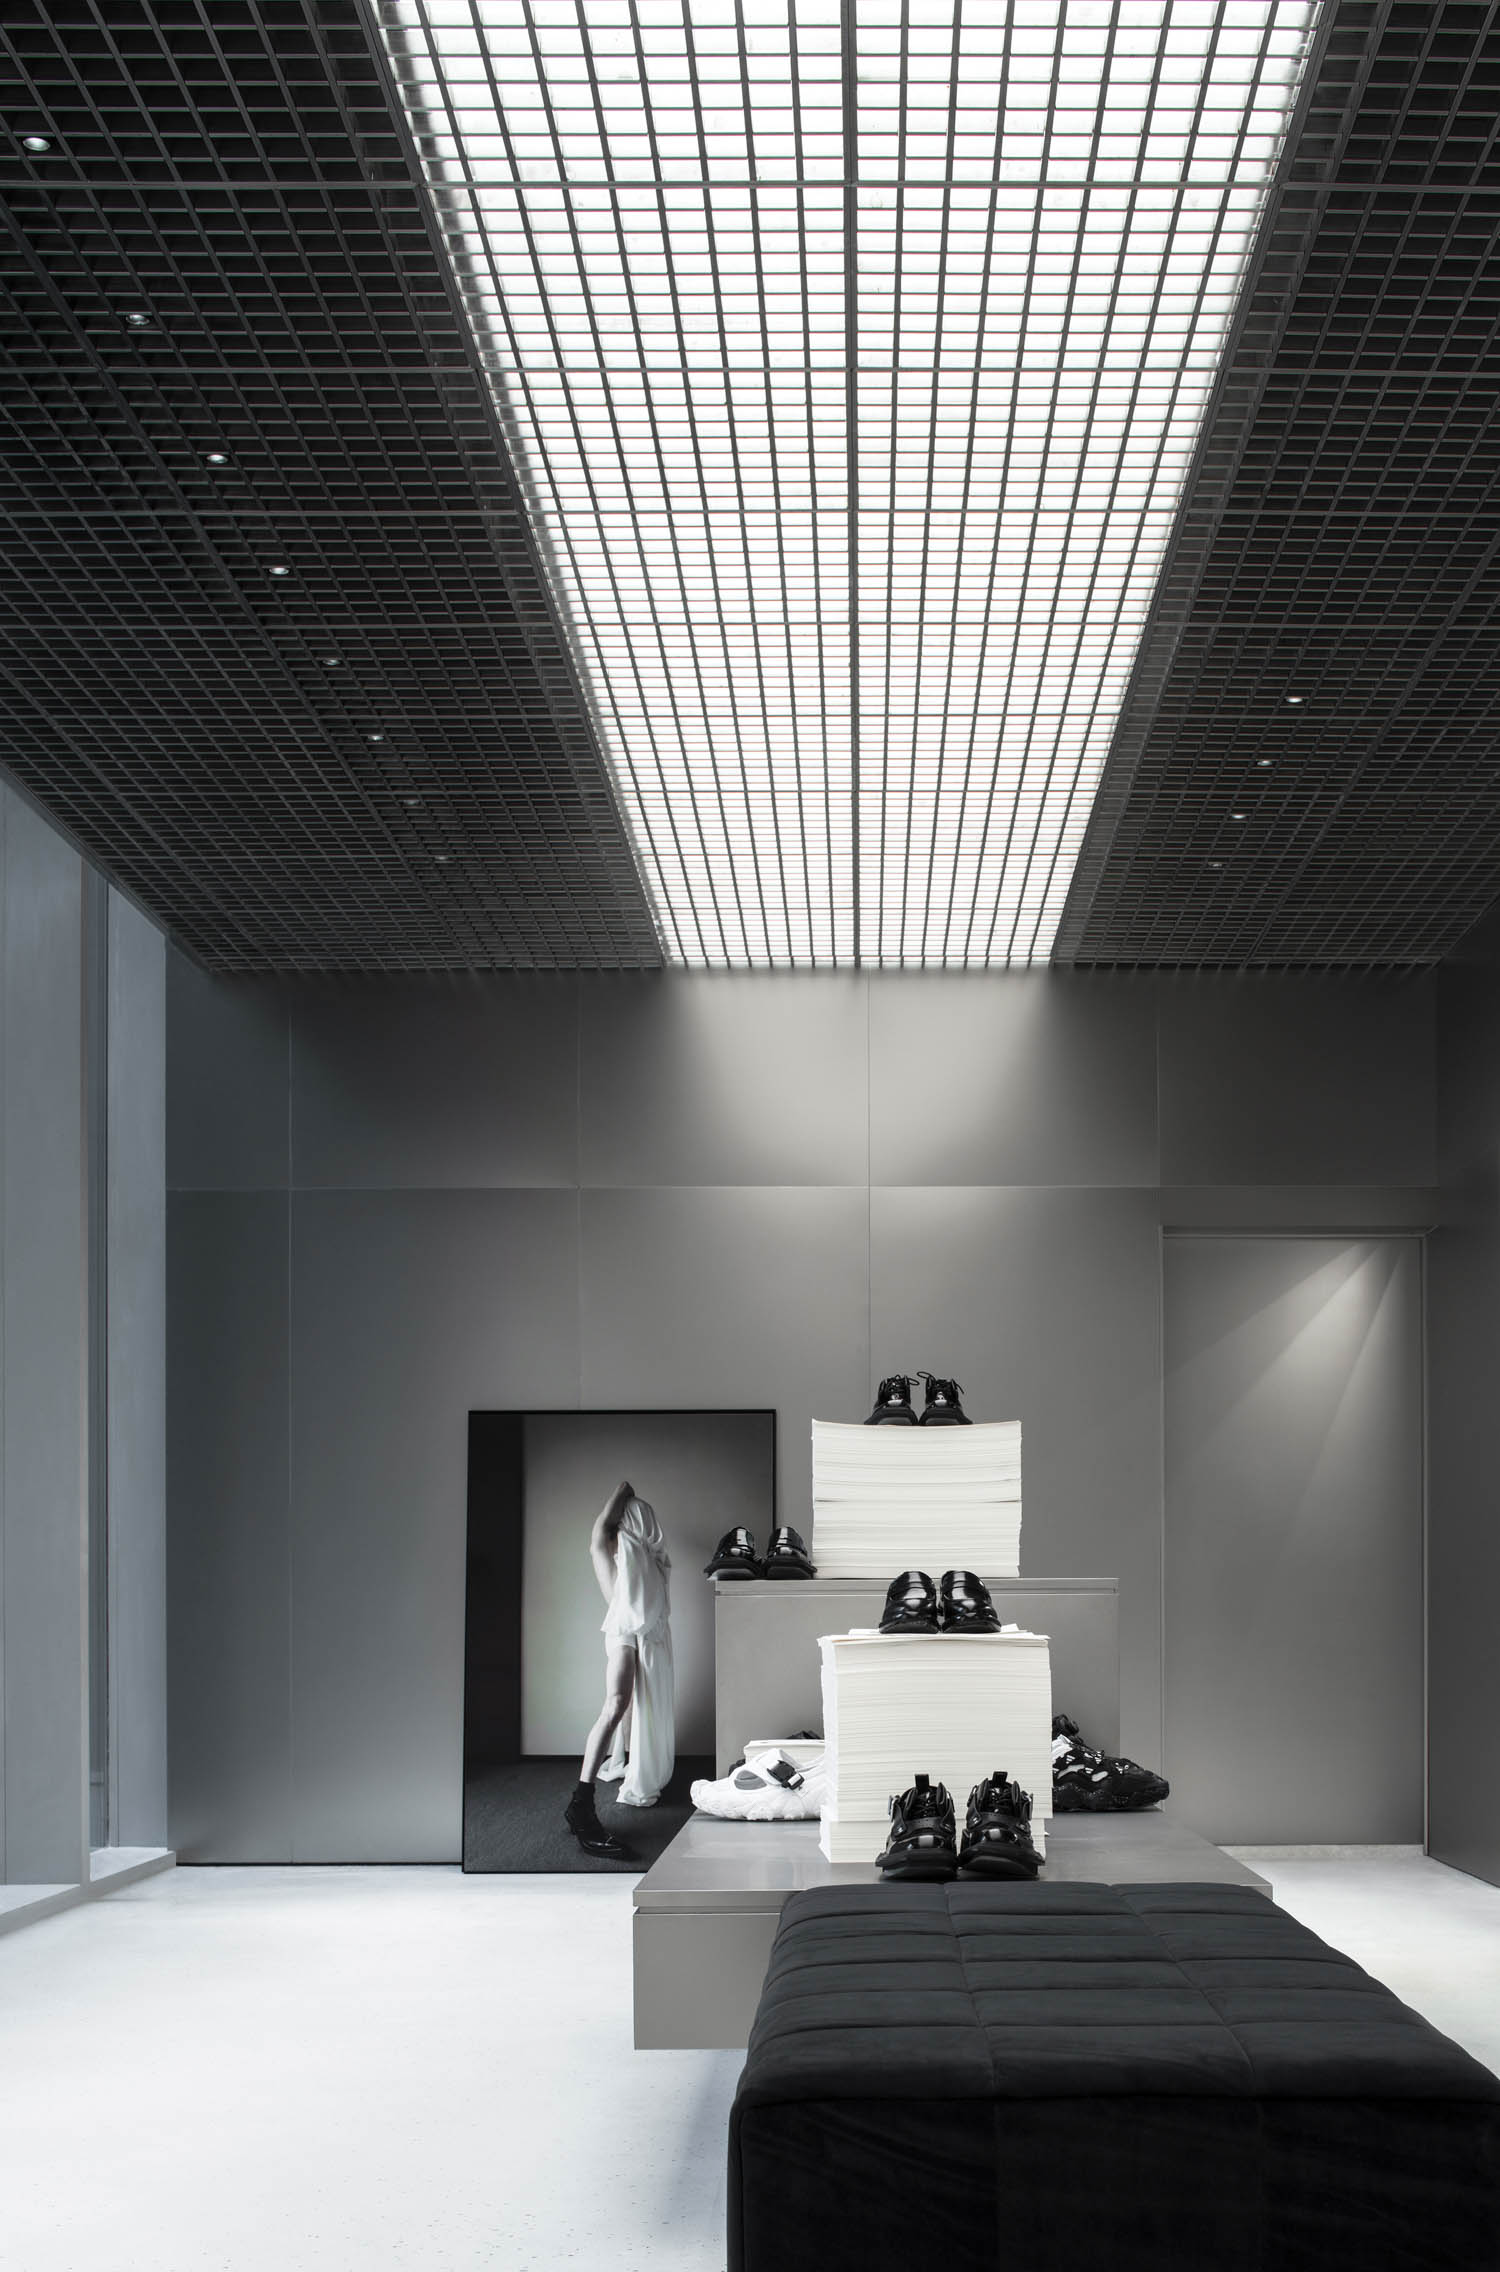 shoes sit on tiered structures in the Hug concept store in Chengdu, China by Atmosphere Architects